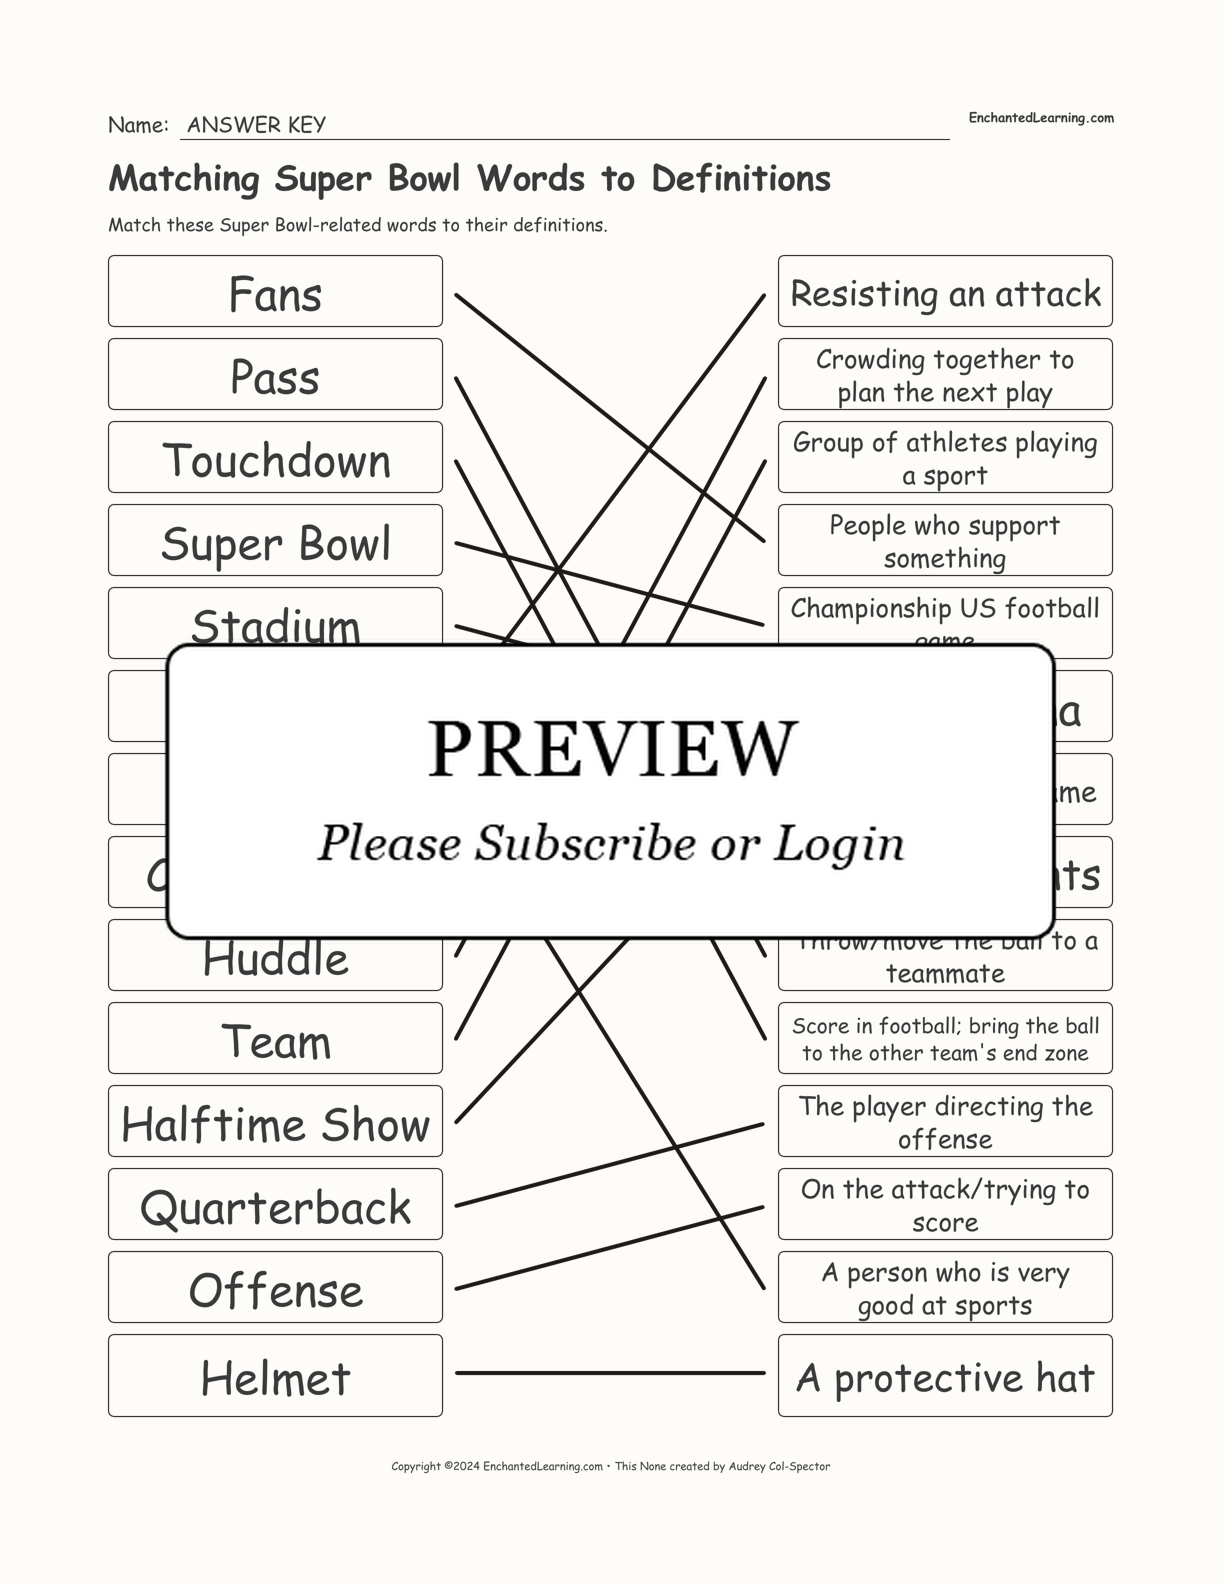 Matching Super Bowl Words to Definitions interactive worksheet page 2